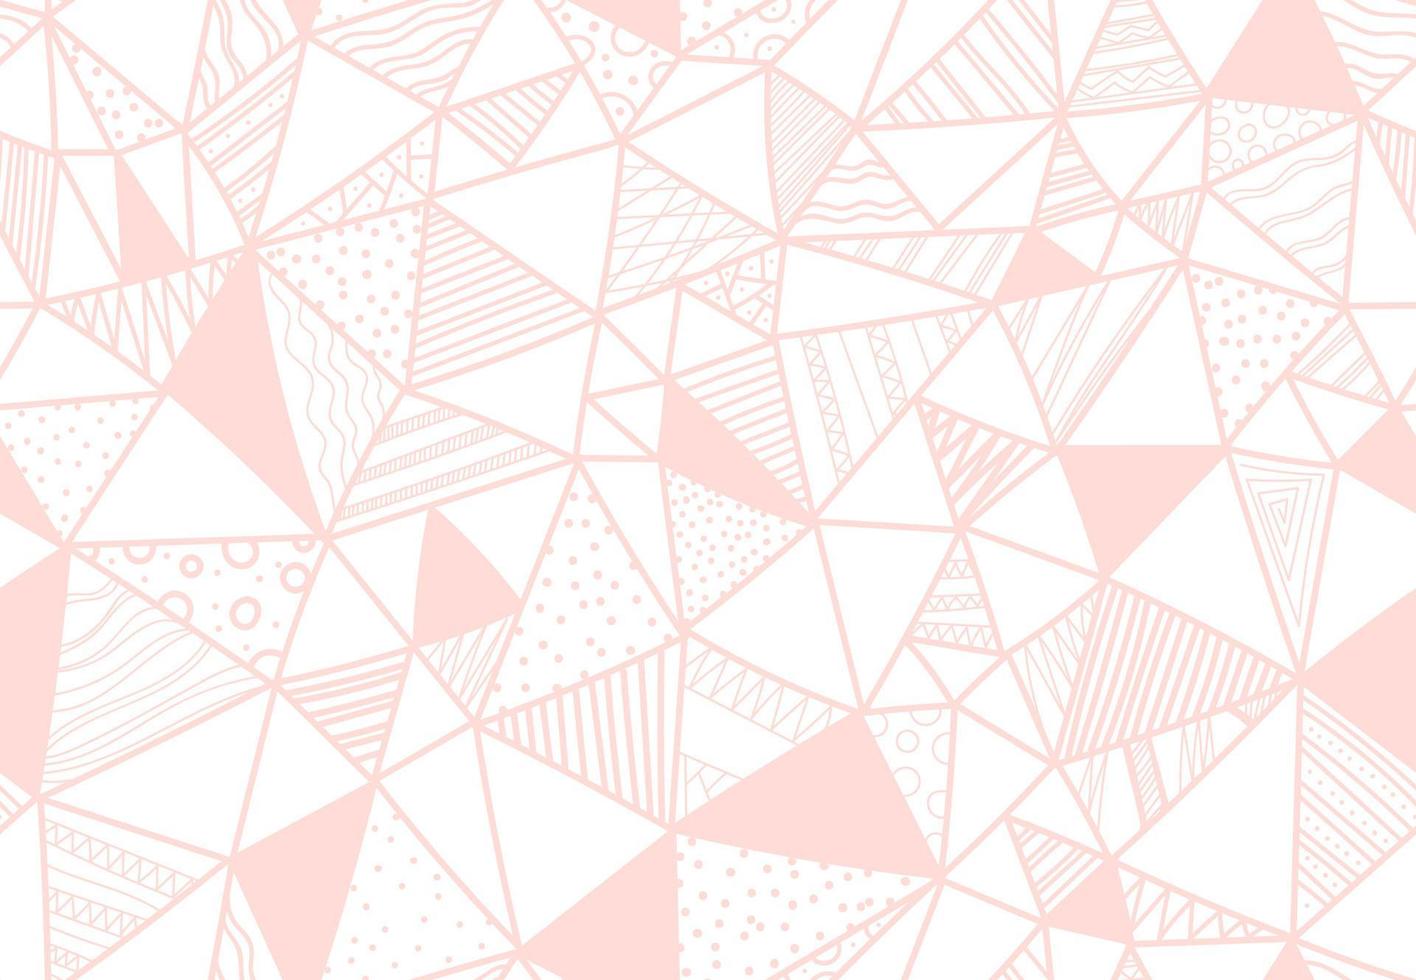 Hand drawn seamless doodle vector pattern with triangles and textures. Fabric or backdrop illustration.